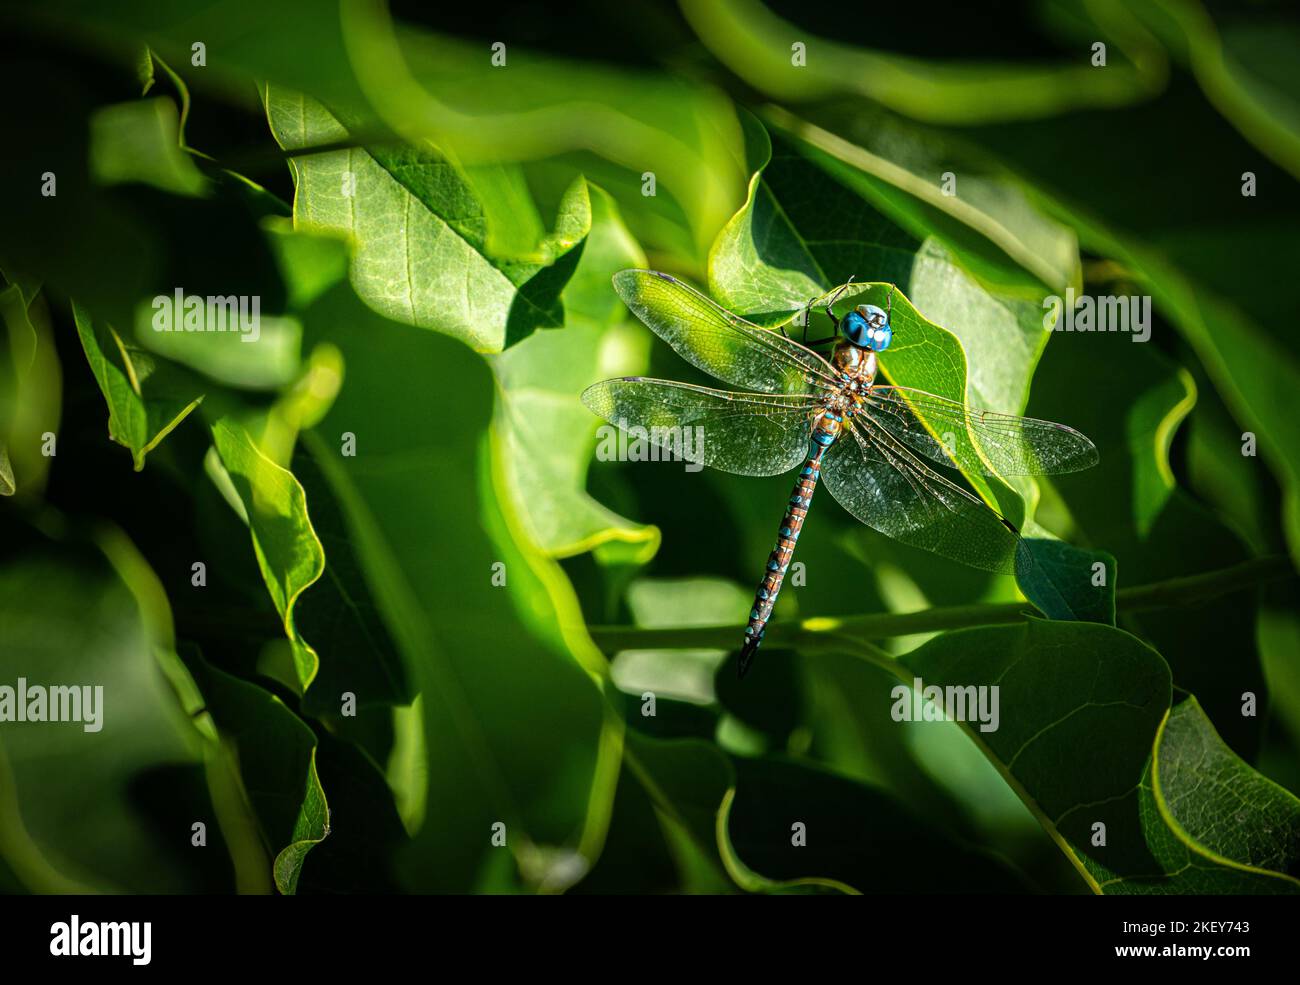 Dragonfly on bright green leaves Stock Photo